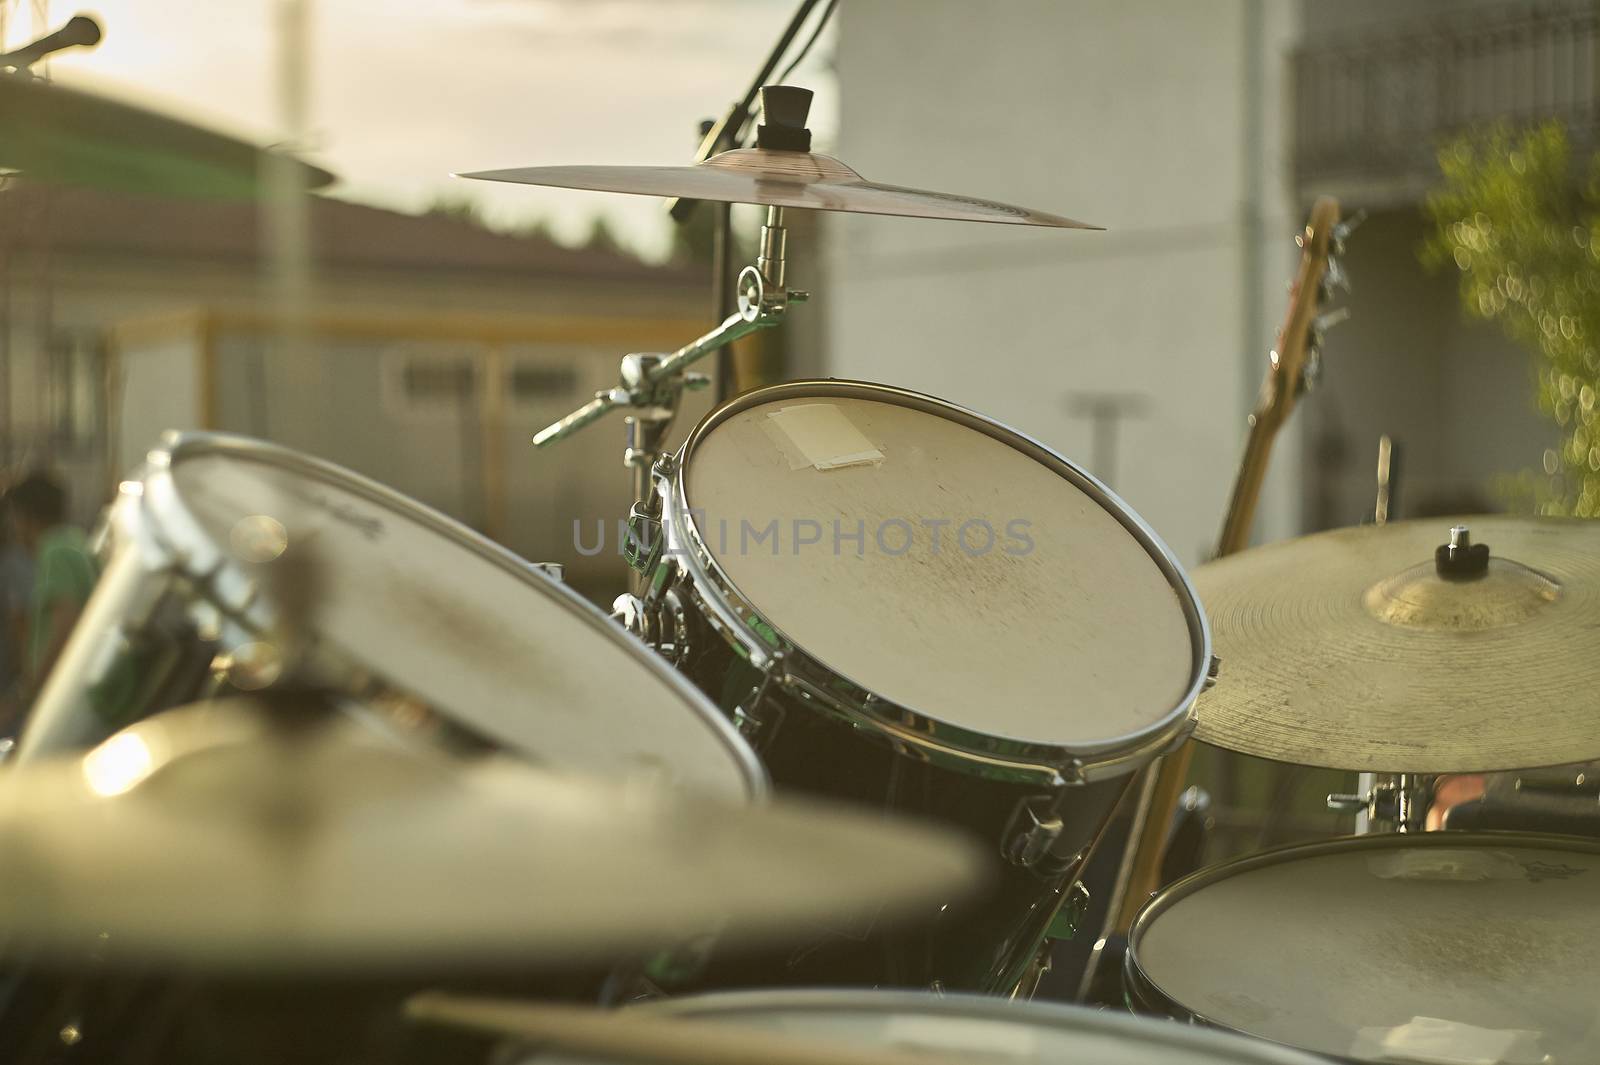 The drums by pippocarlot